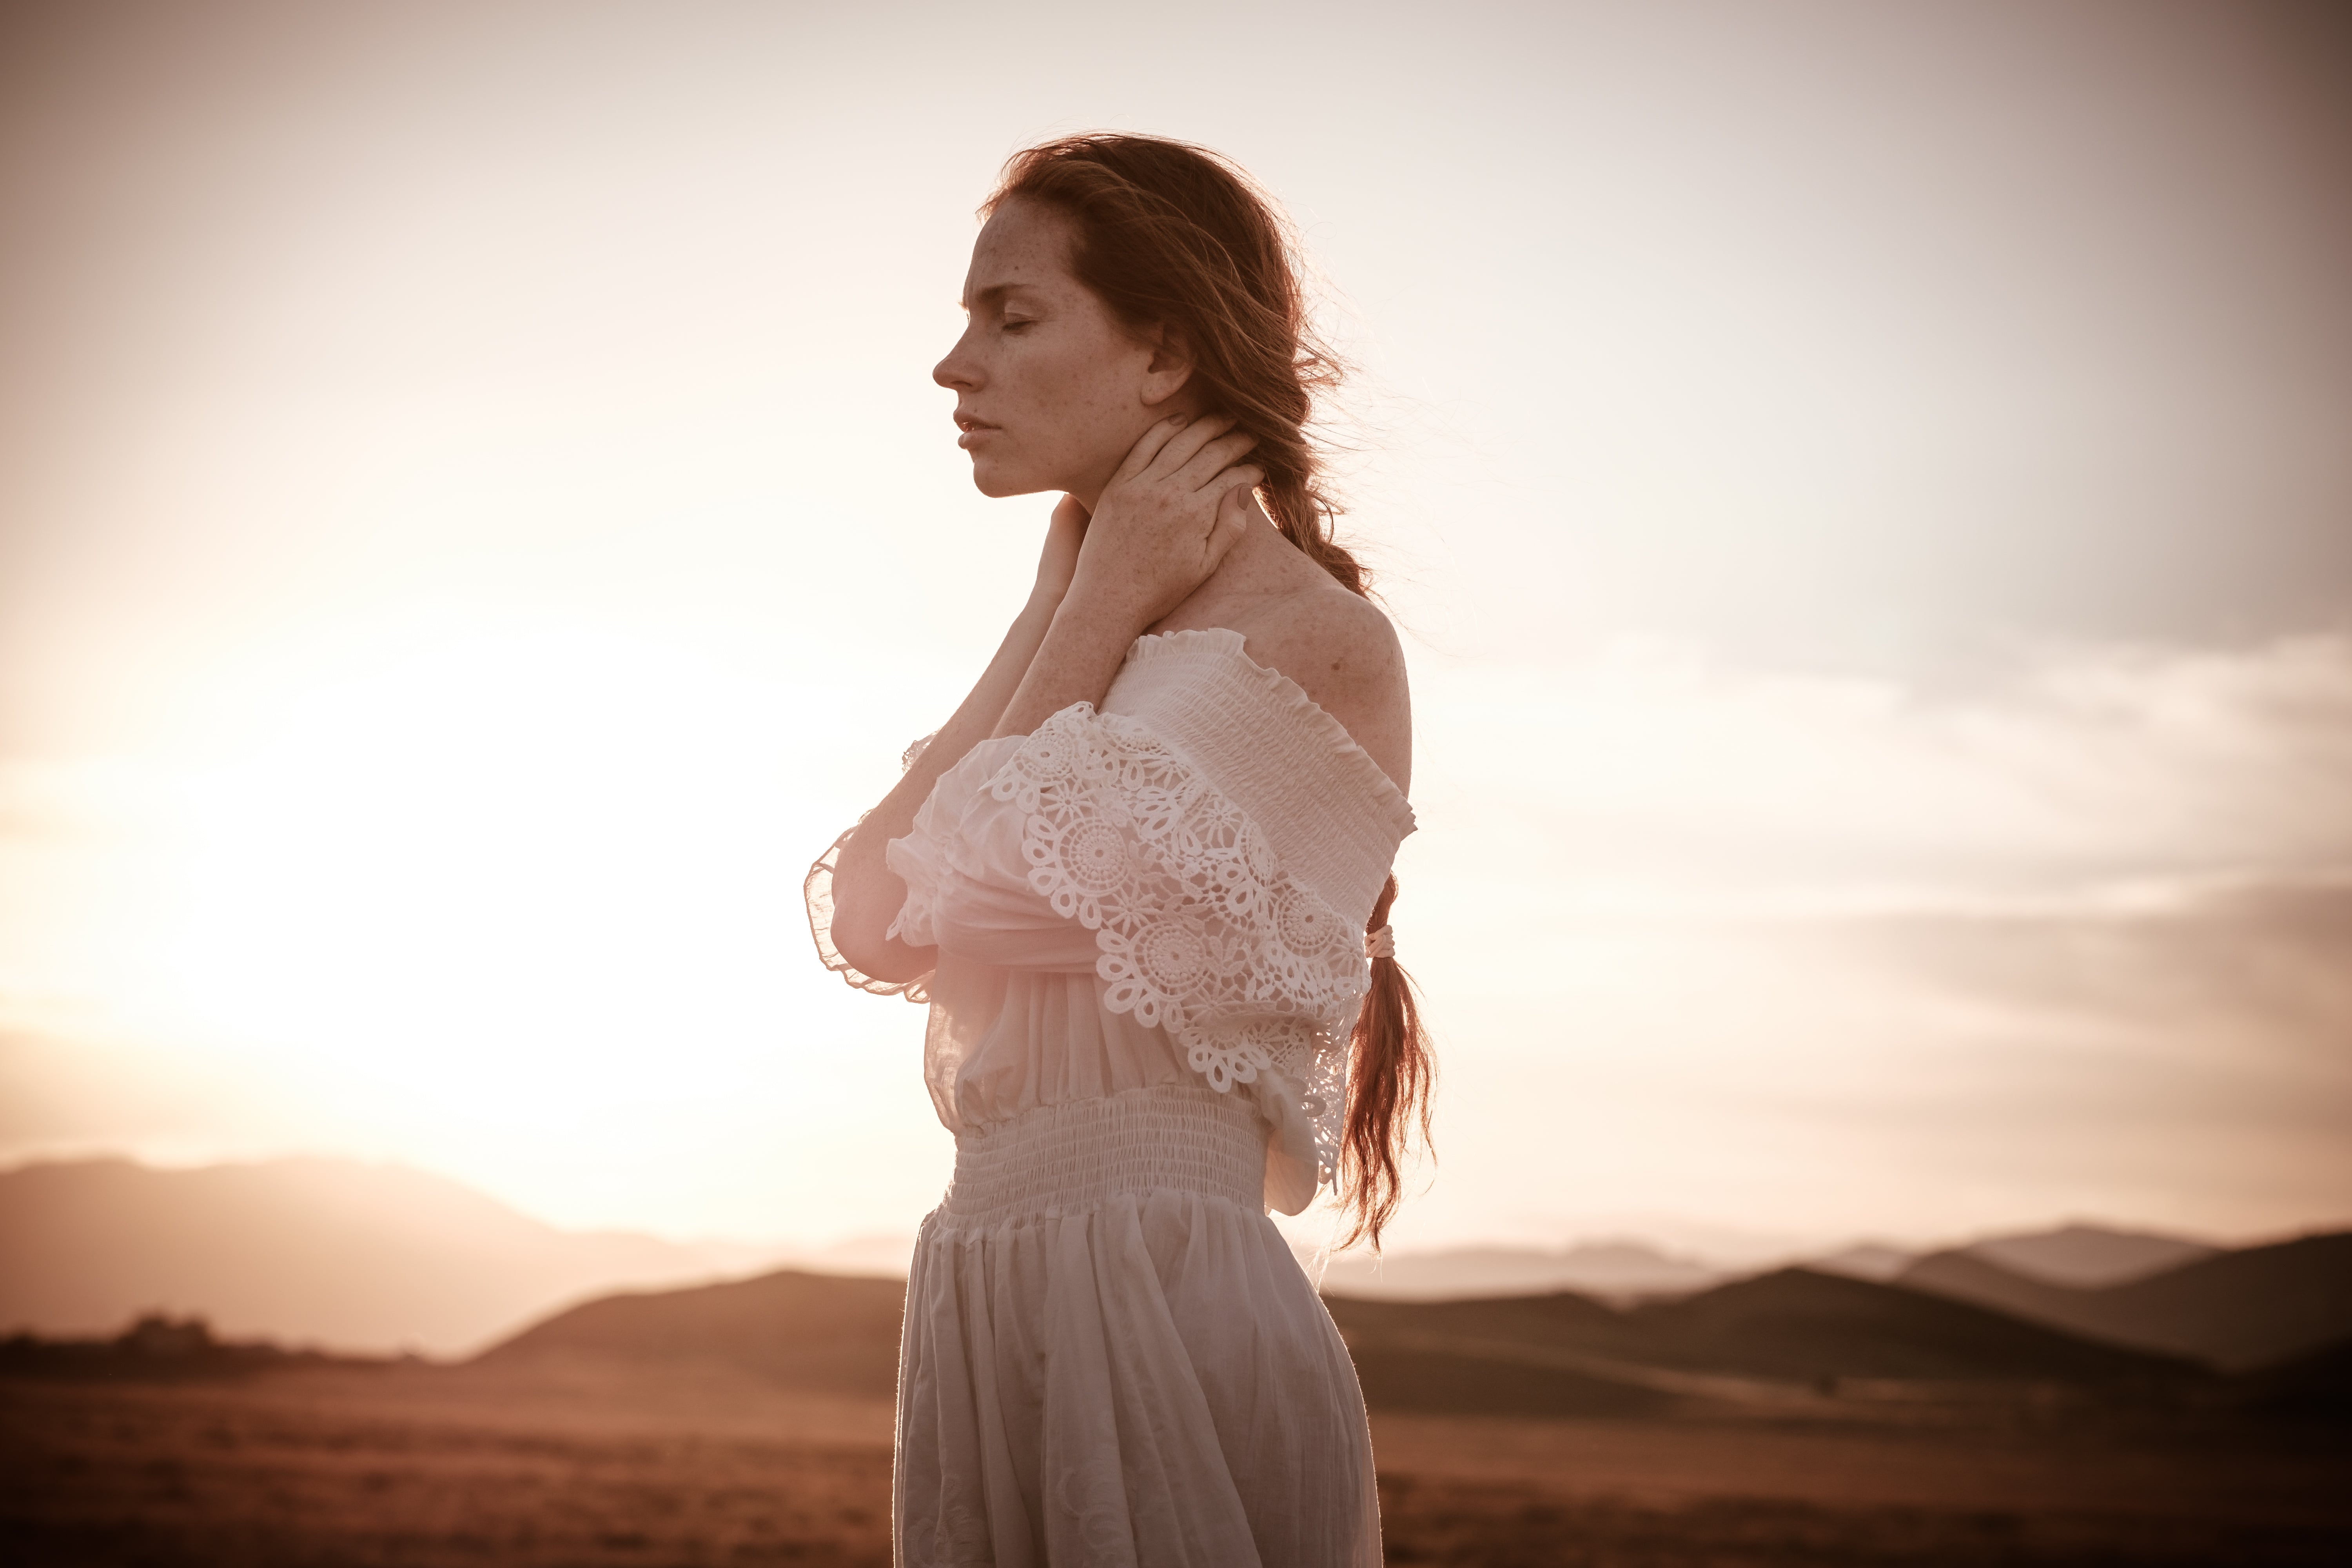 redhead woman in 
a white dress standing in wheat field at sunset